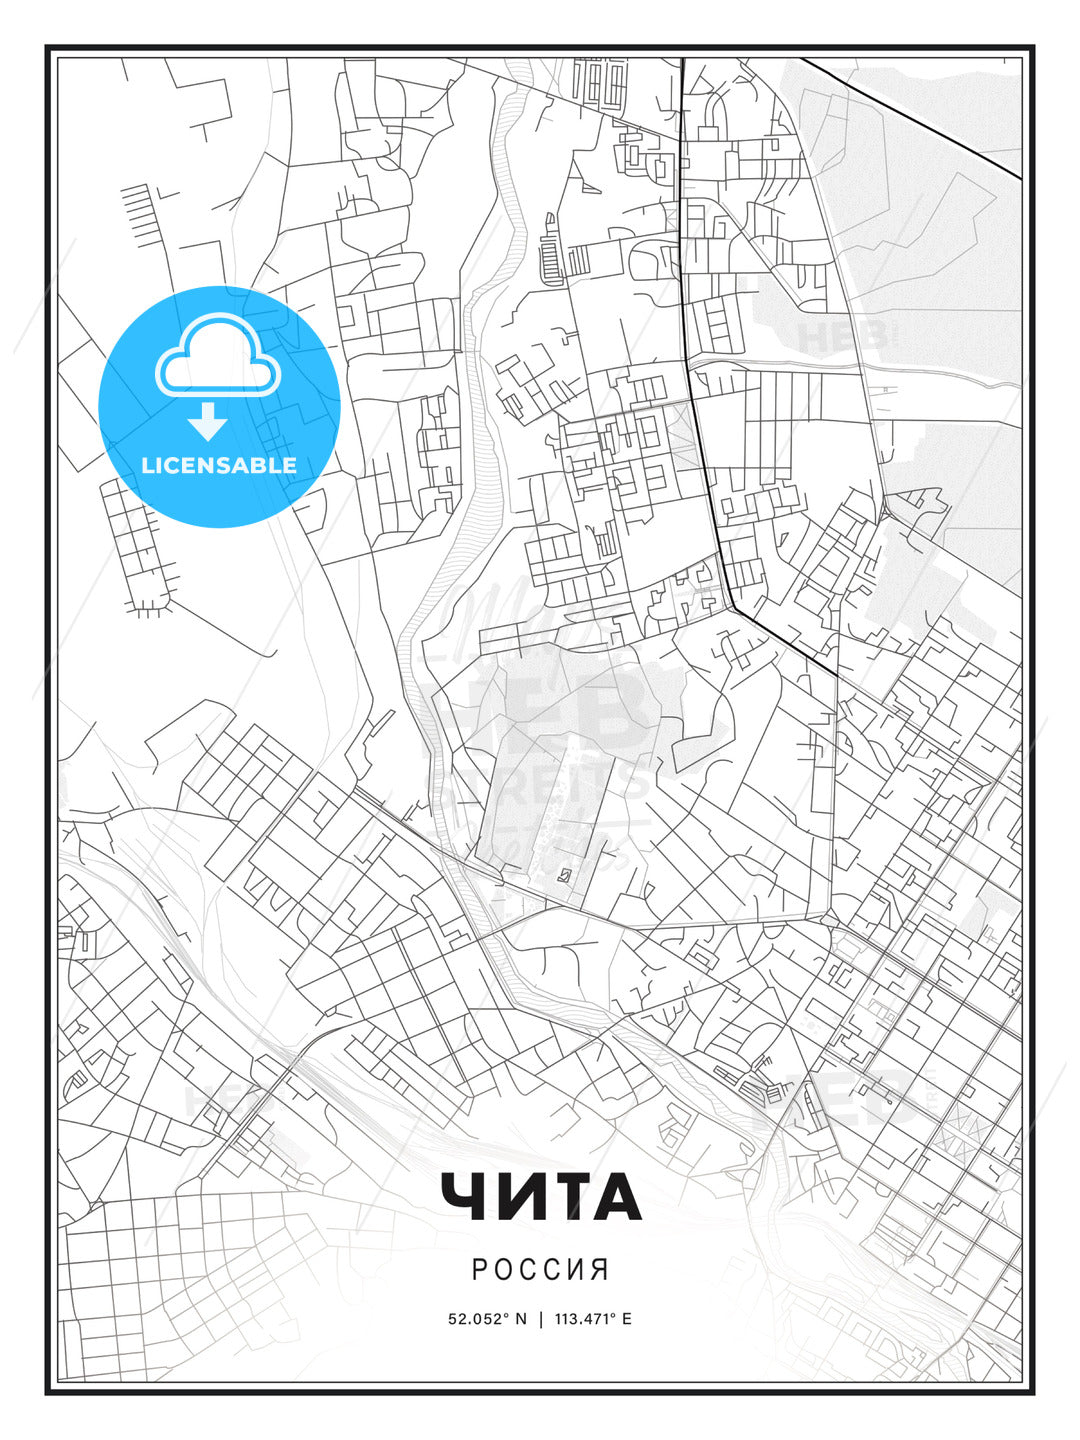 ЧИТА / Chita, Russia, Modern Print Template in Various Formats - HEBSTREITS Sketches